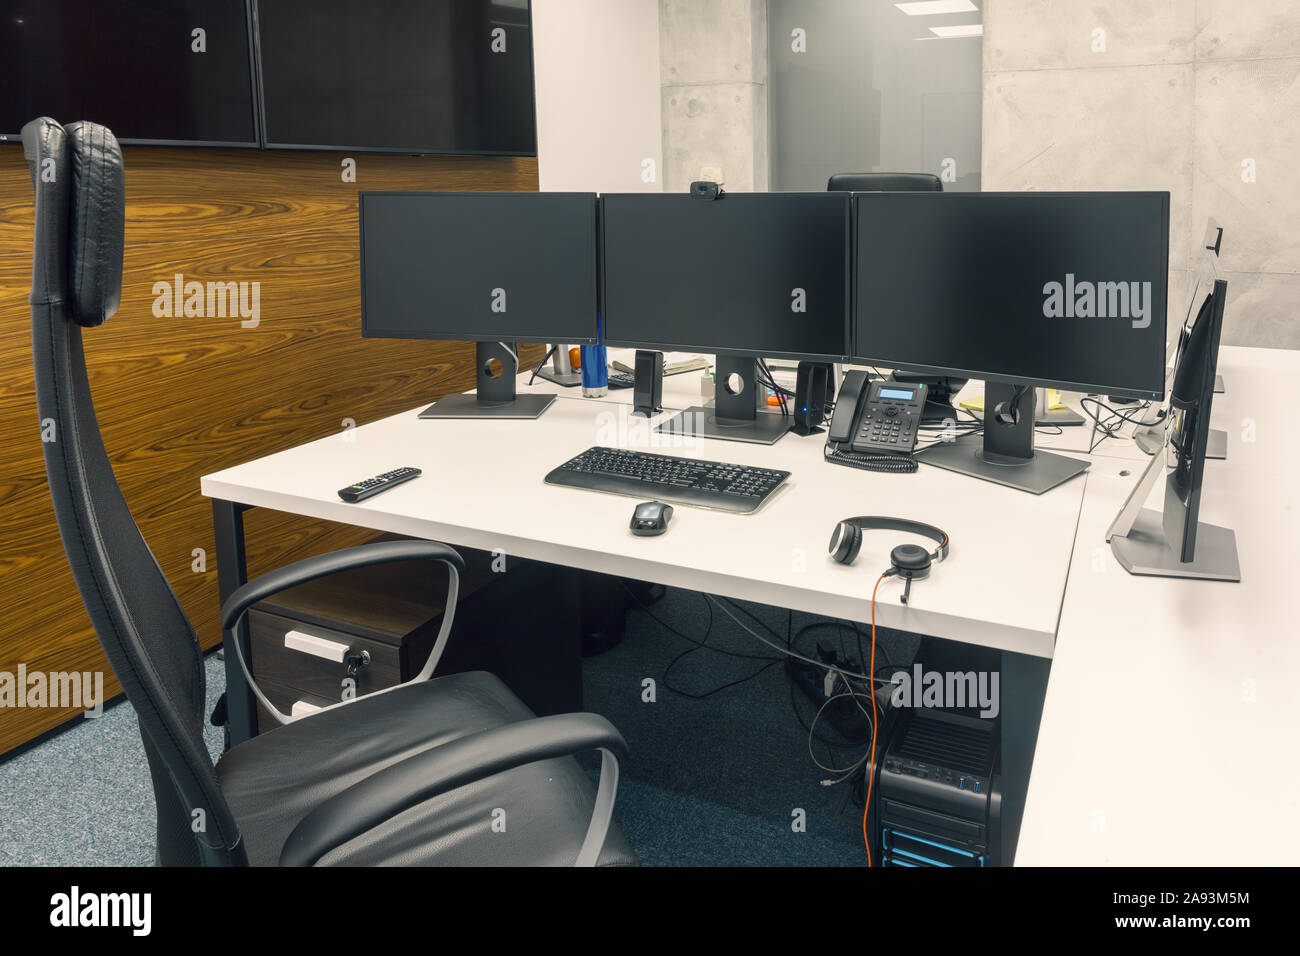 dvelopers desktop with three black monitors in office. empty chair Stock Photo